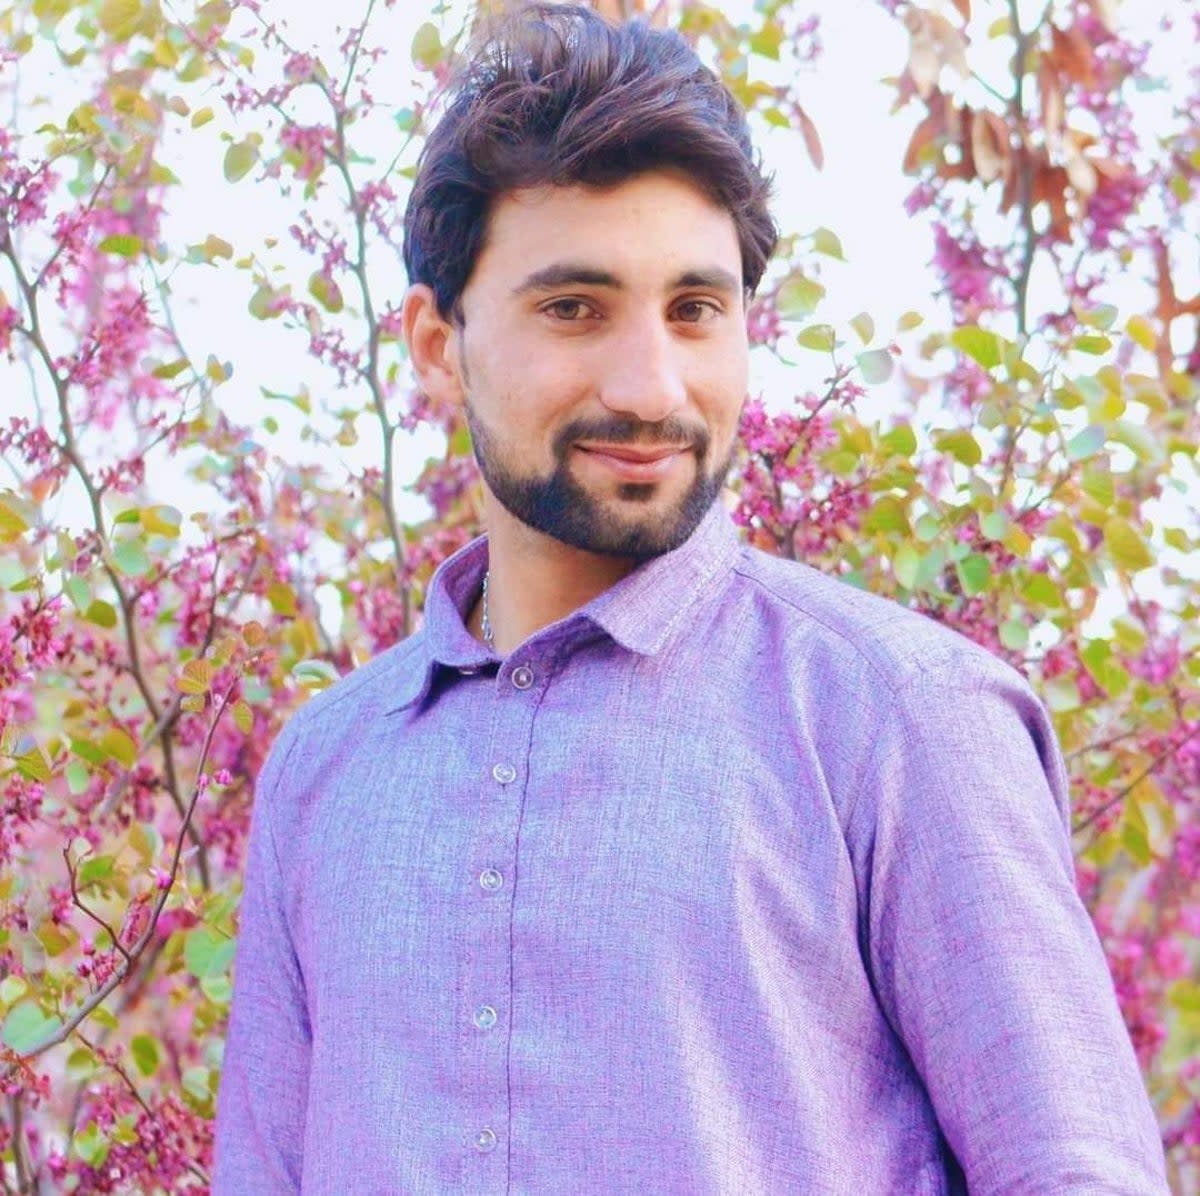 Riaz Ahmadzai, who had worked with British forces, was among those killed by the Taliban (Supplied)